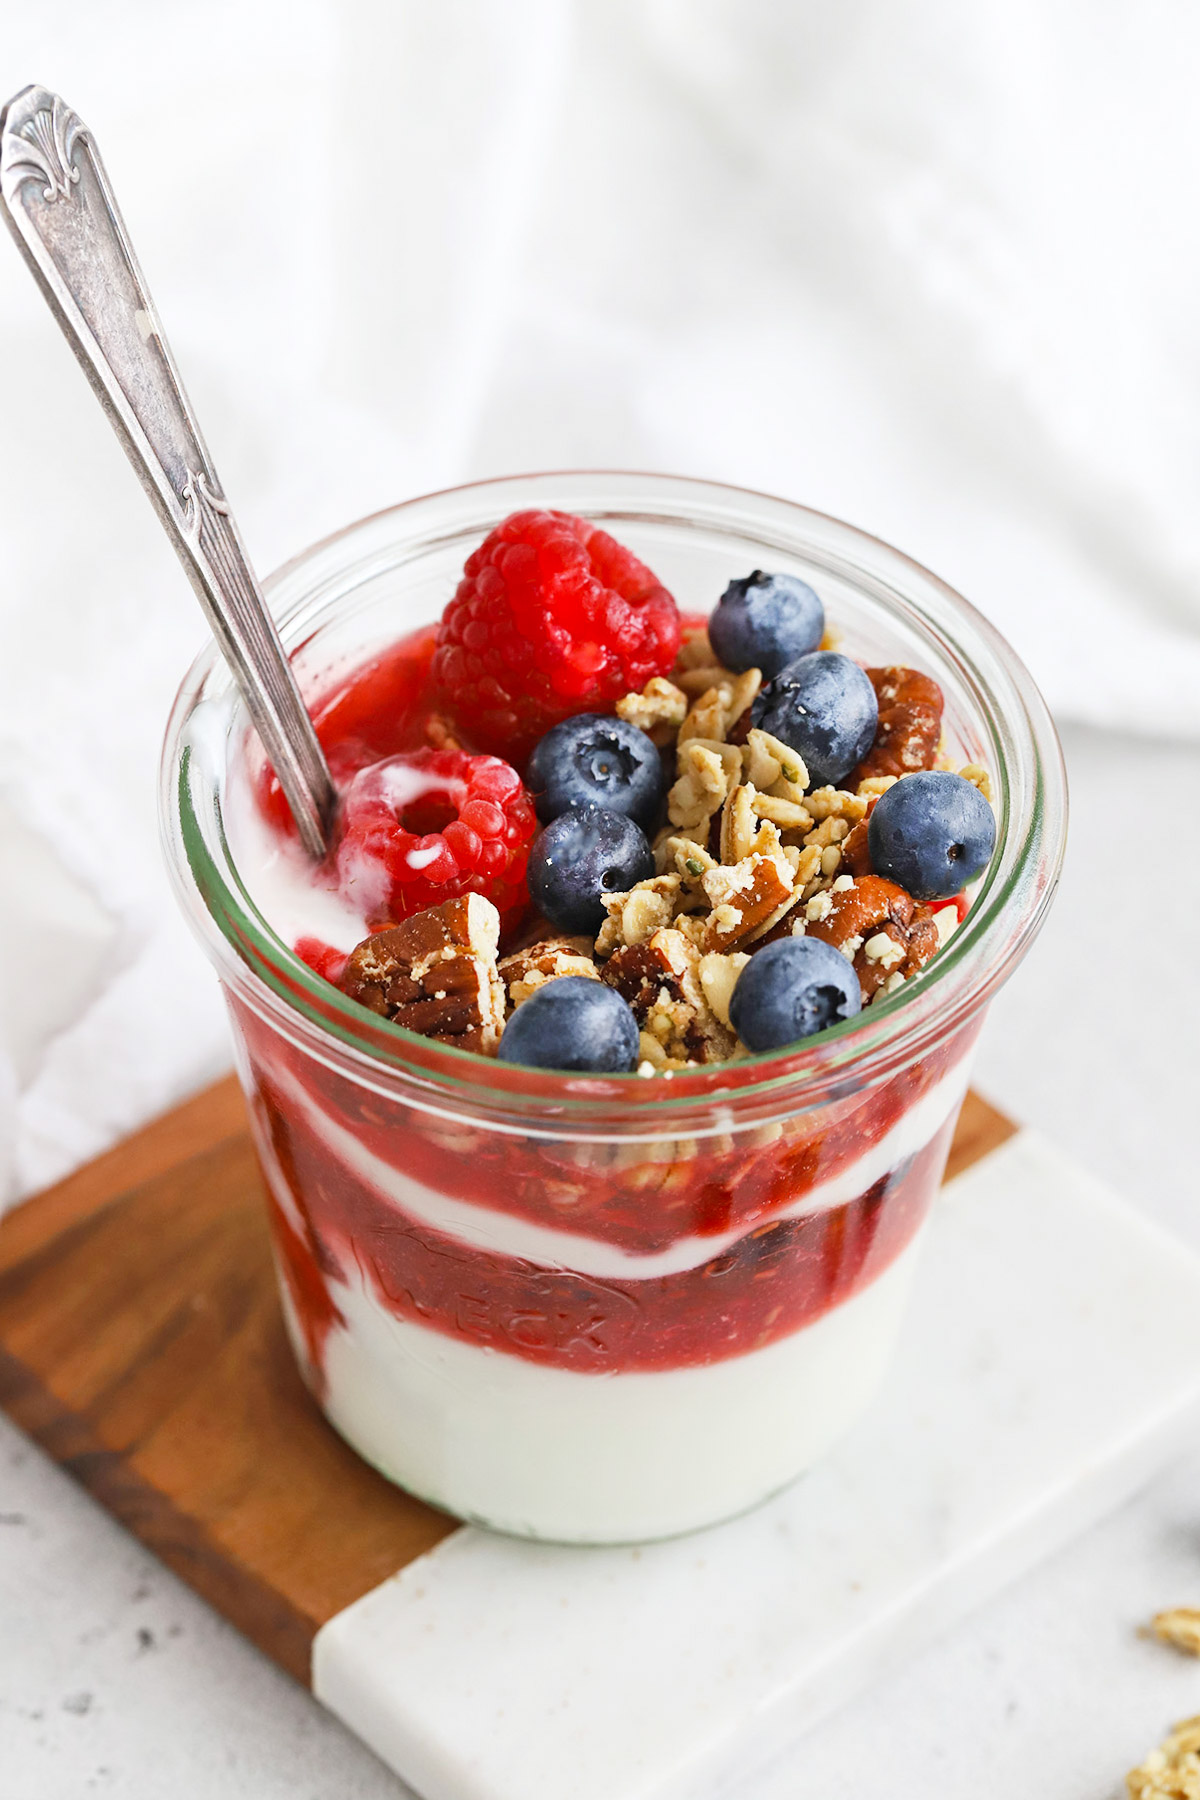 Front view of a yogurt and berry parfait made with homemade maple pecan granola